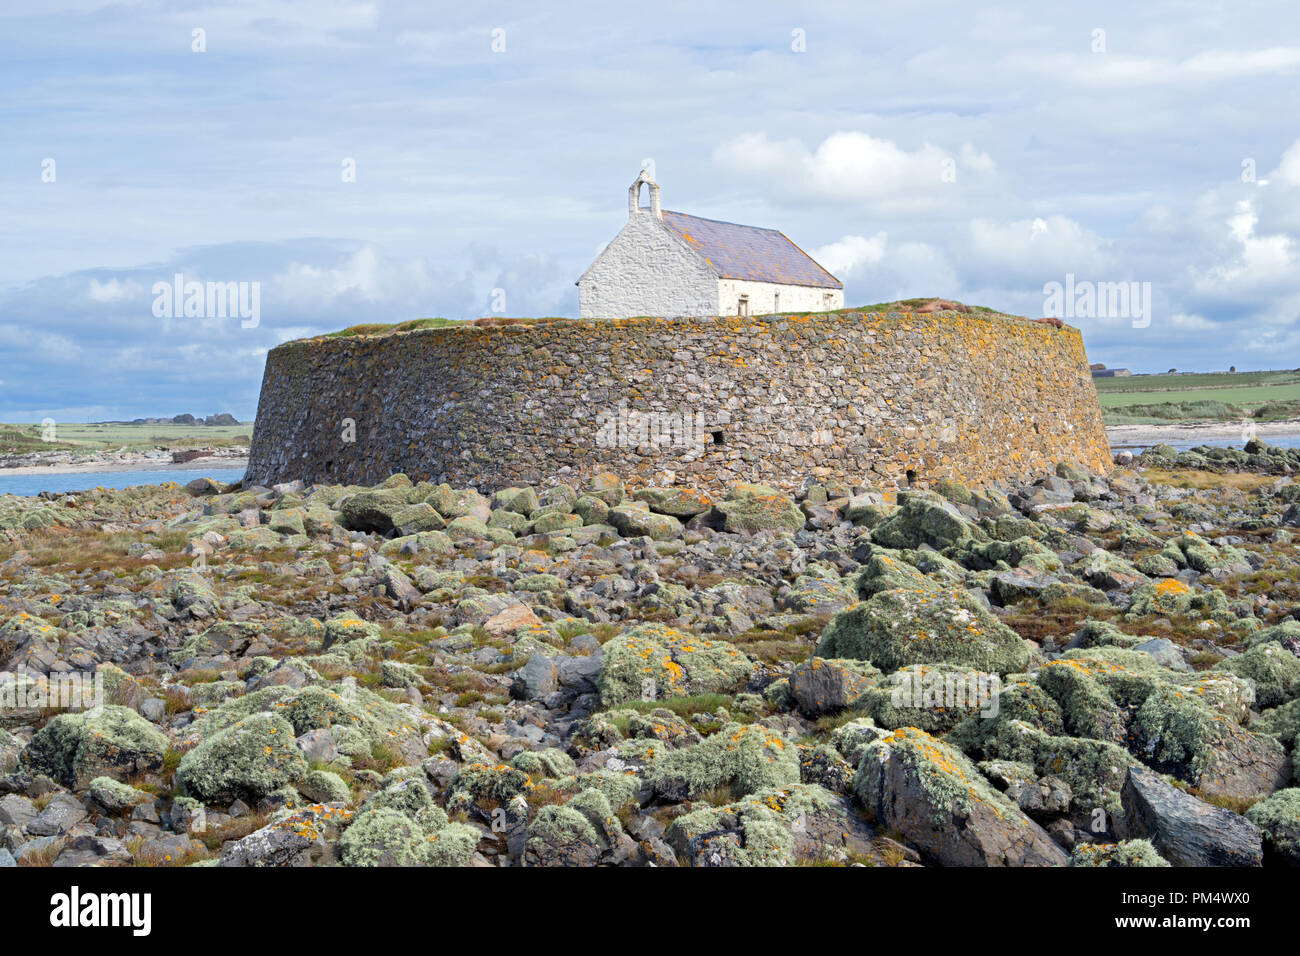 St Cwyfan's, known as Church in the Sea, is located on the small tidal island of Cribinau near Aberffraw, Anglesey. It dates from the 12th centu Stock Photo